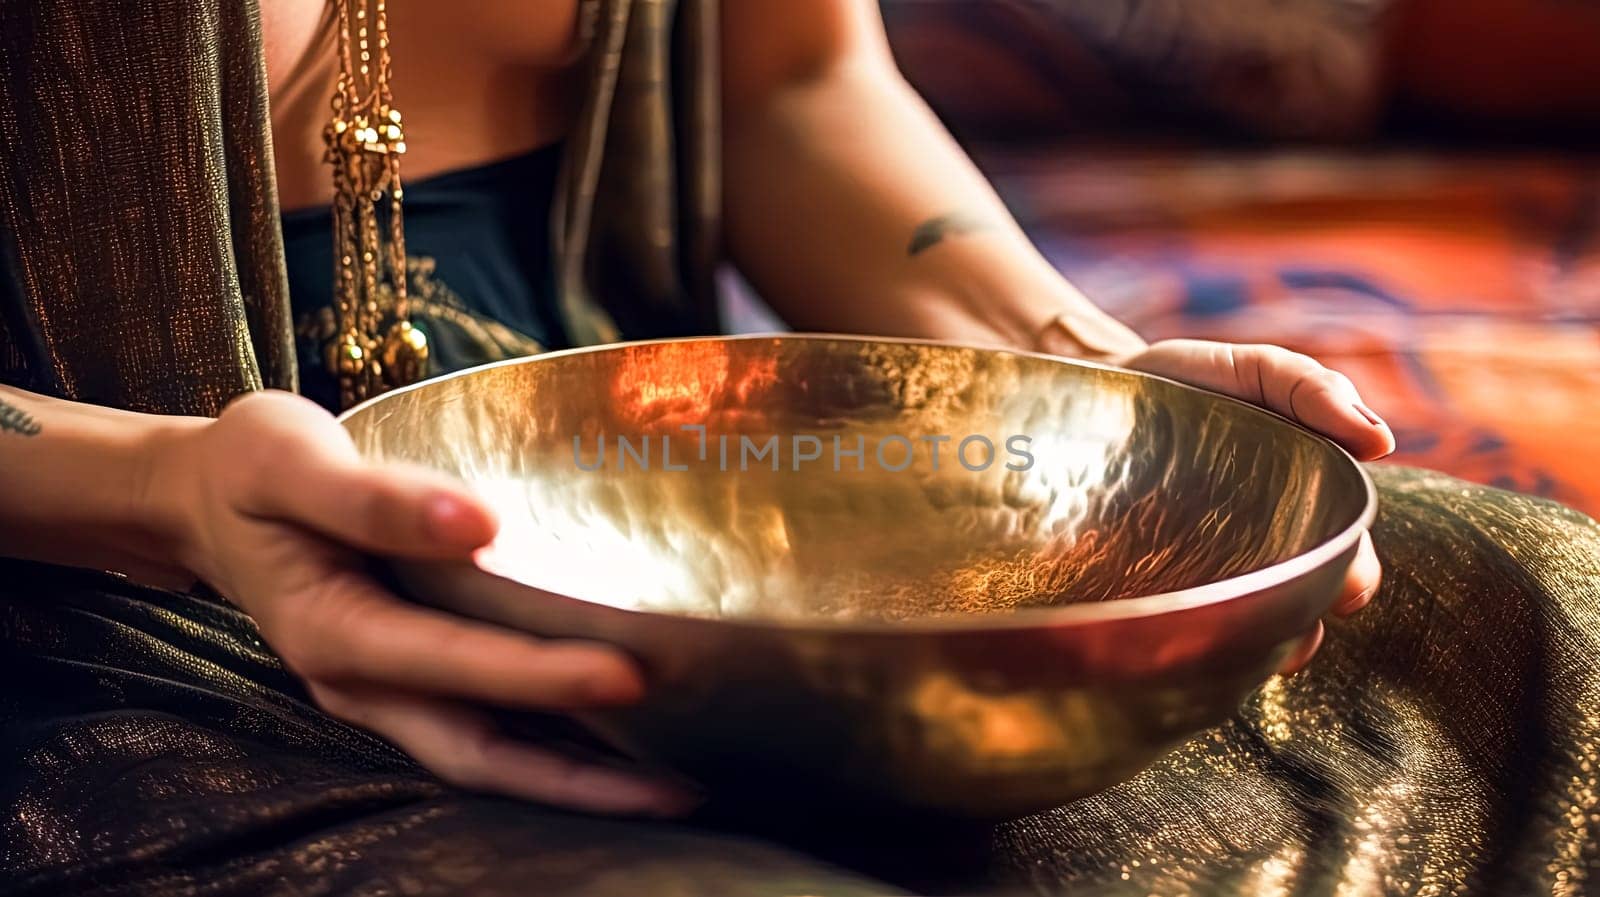 A woman is holding a gold bowl in her hands. The bowl is large and has a shiny, reflective surface. The woman is in a relaxed and peaceful state, possibly meditating or enjoying a moment of solitude